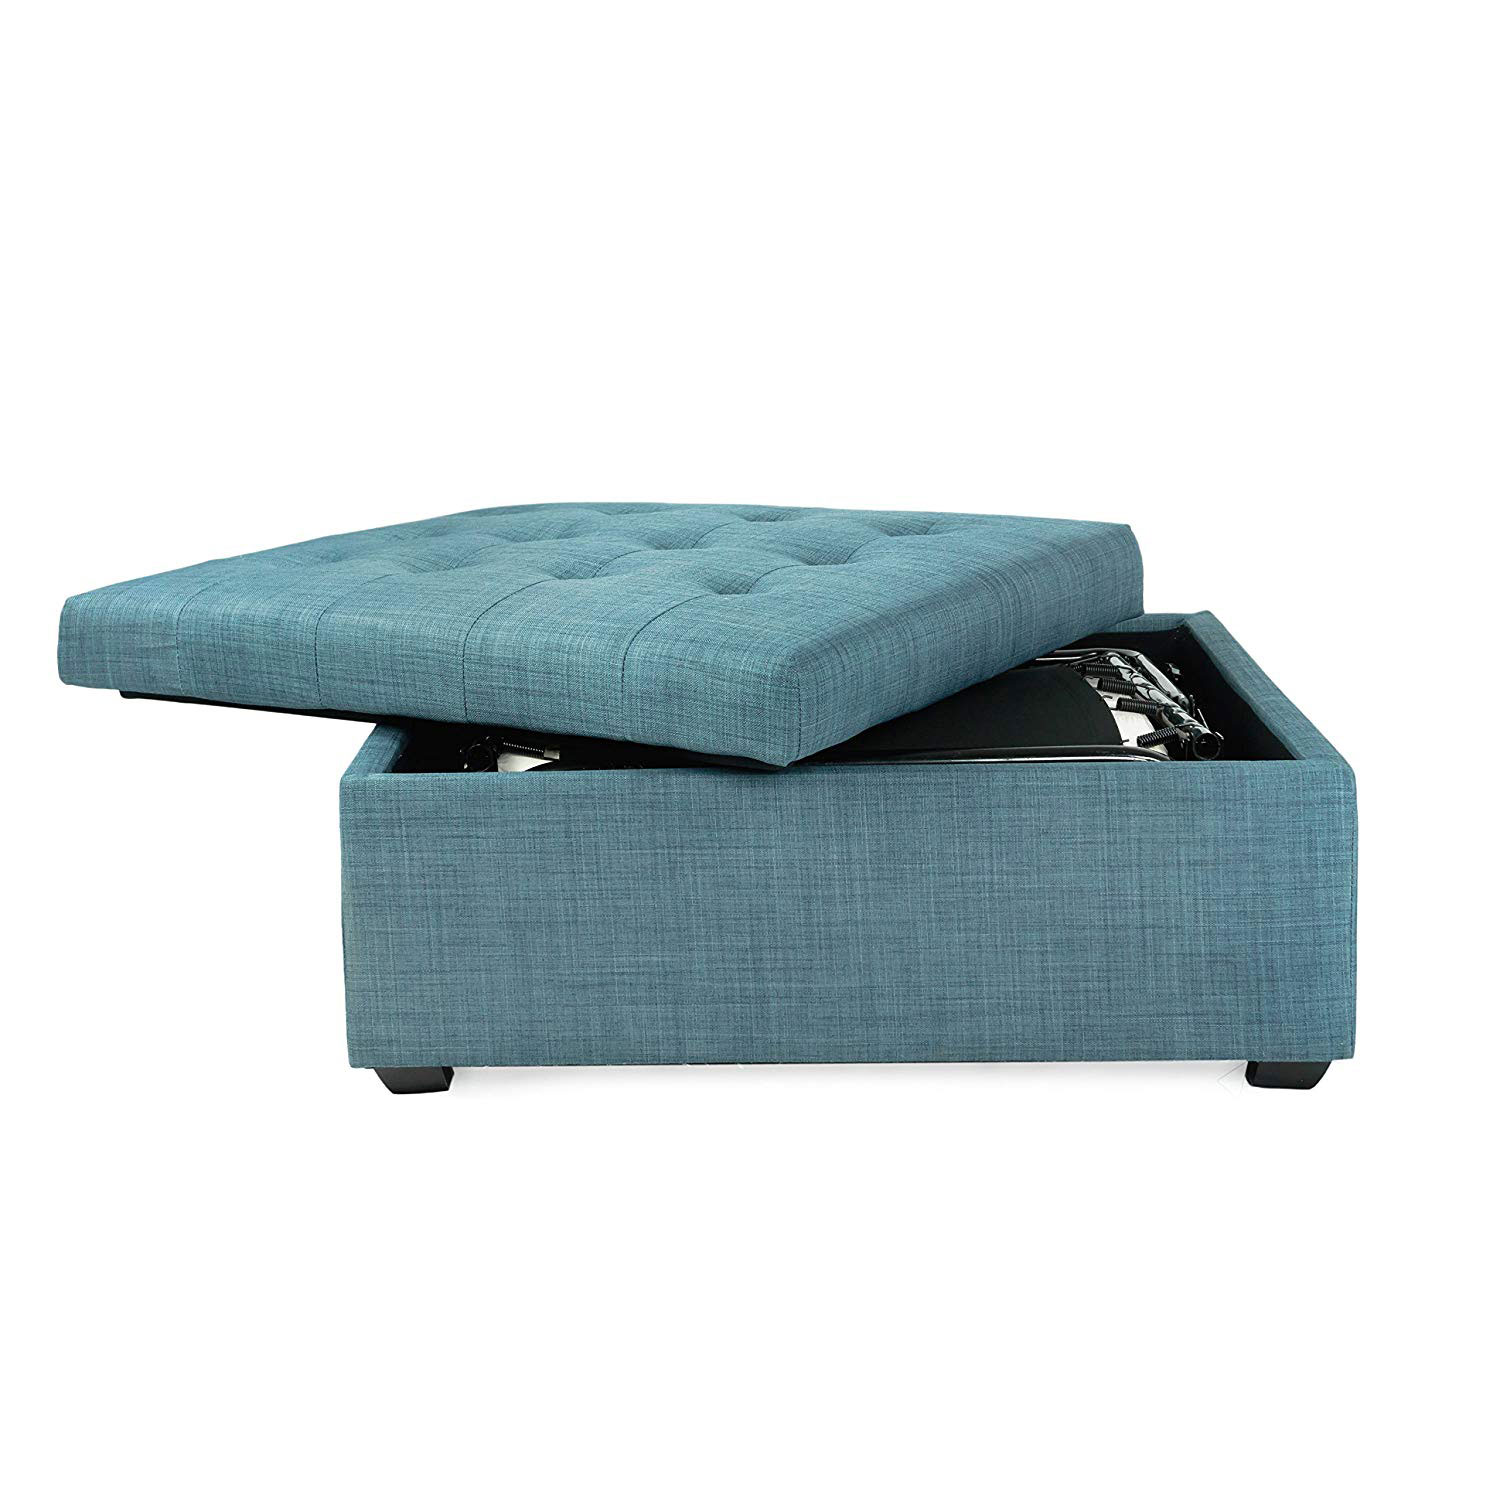 SpaceMaster iBed Convertible Ottoman Fold Out Hideaway Guest Bed, Blue ...